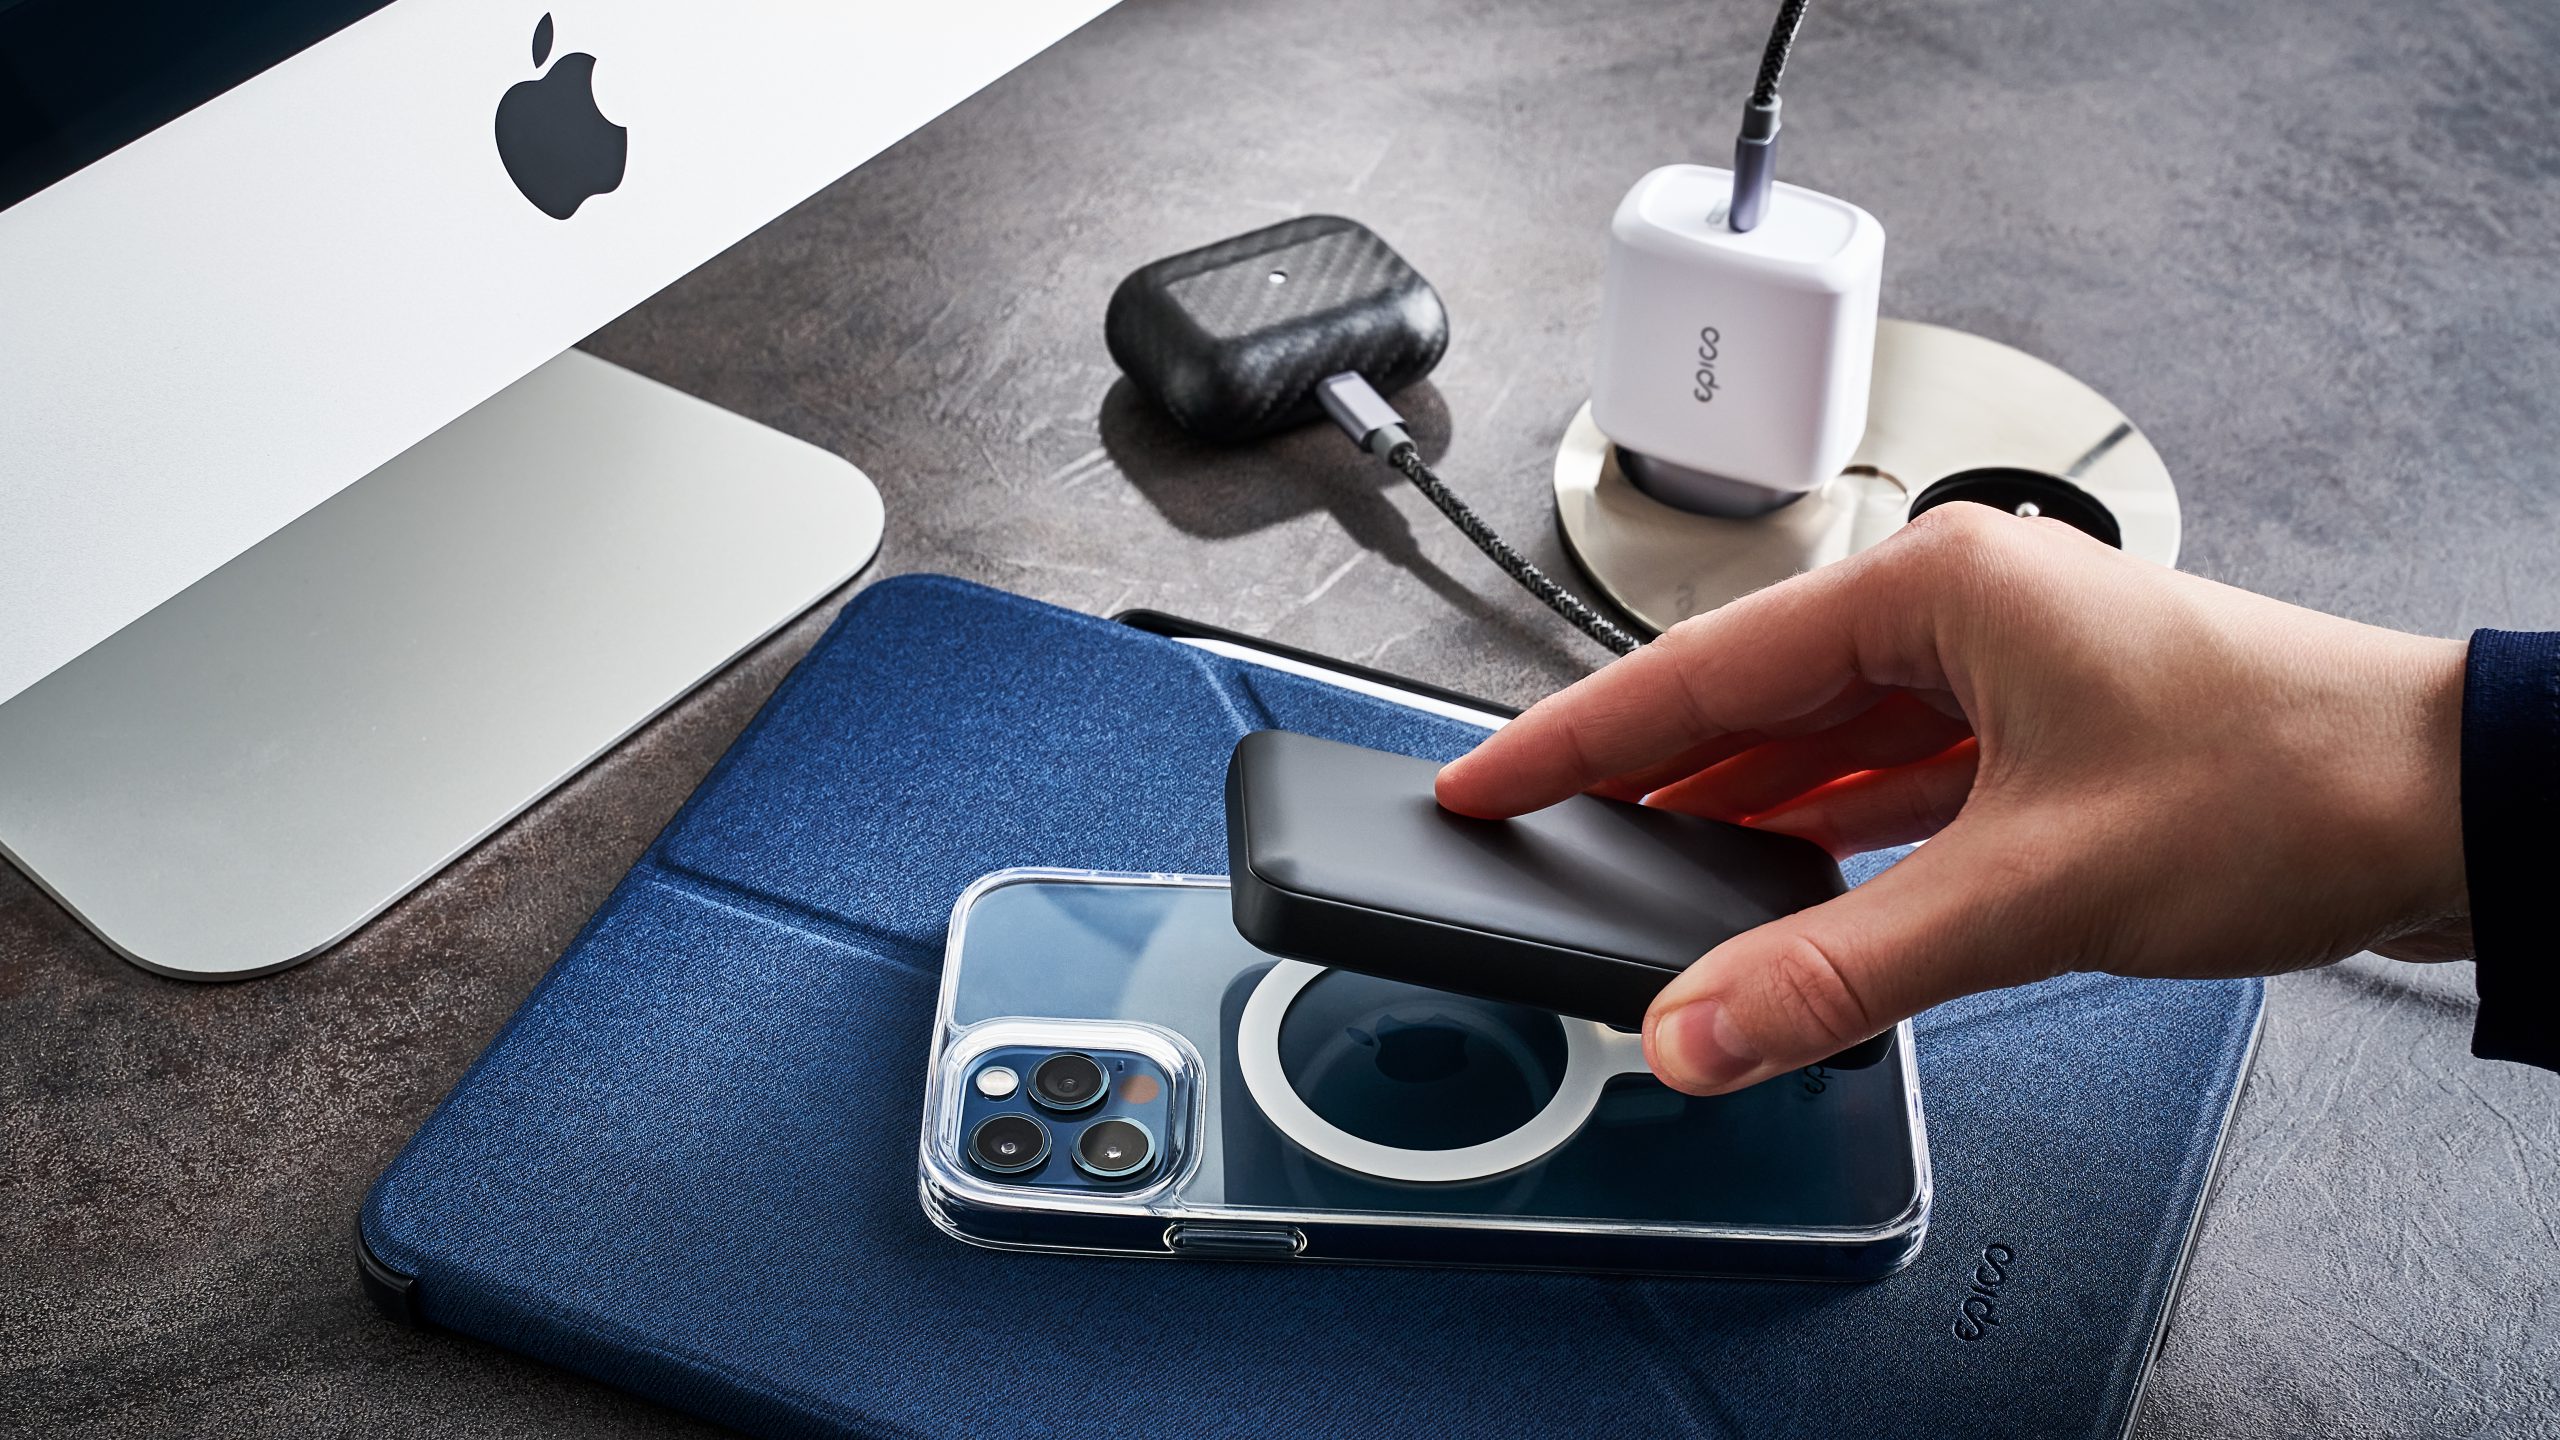 Magnetic wireless power bank magsafe